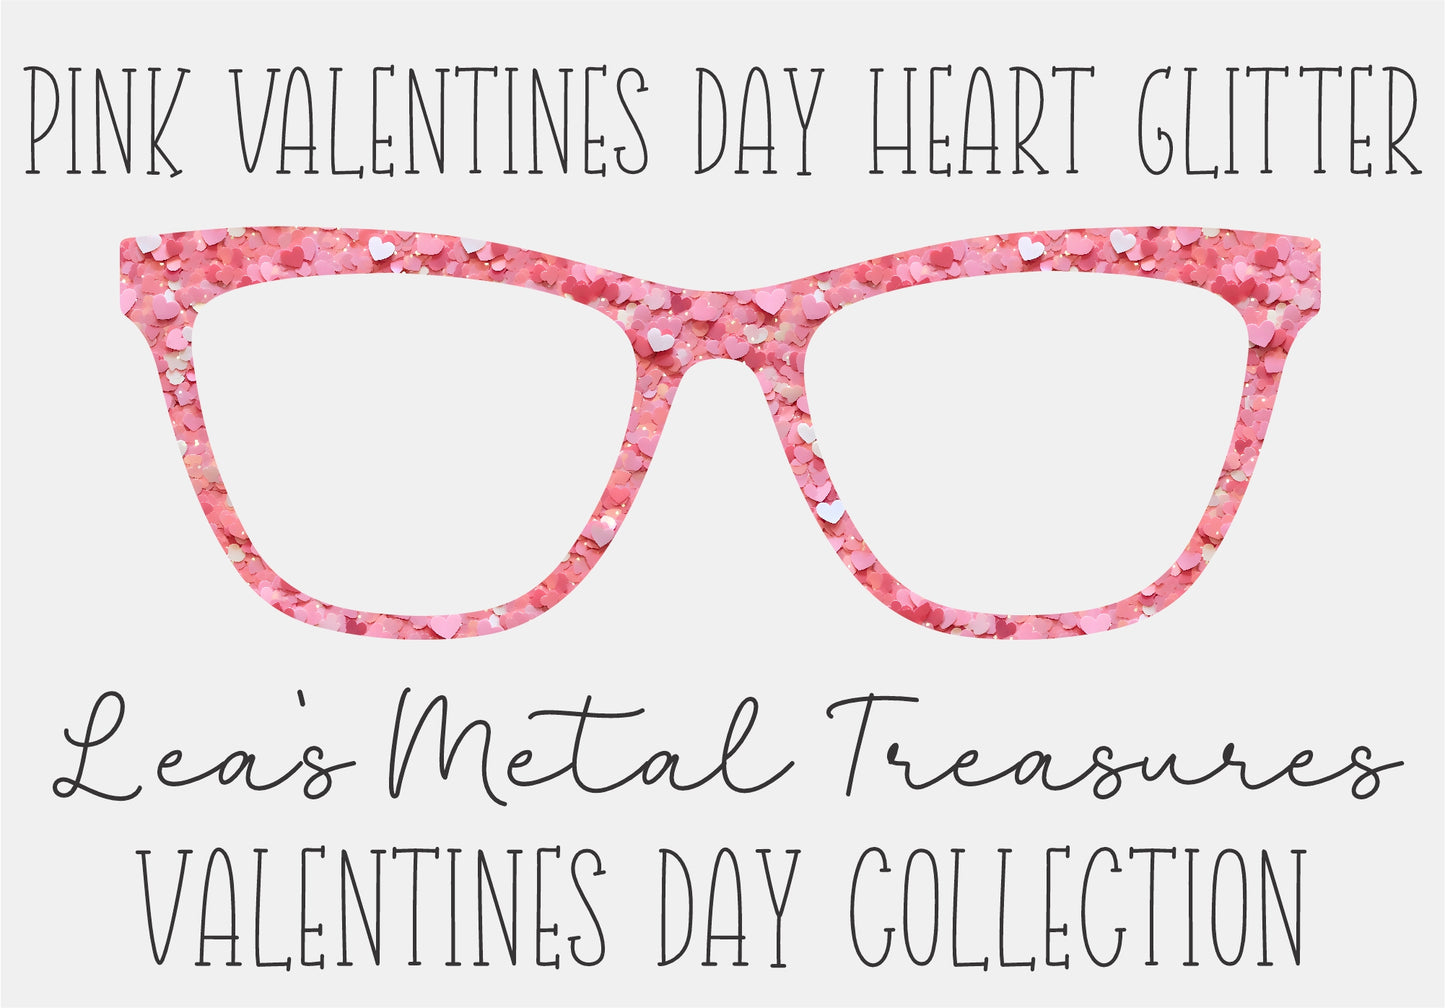 PINK VALENTINES DAY HEART GLITTER Eyewear Frame Toppers COMES WITH MAGNETS